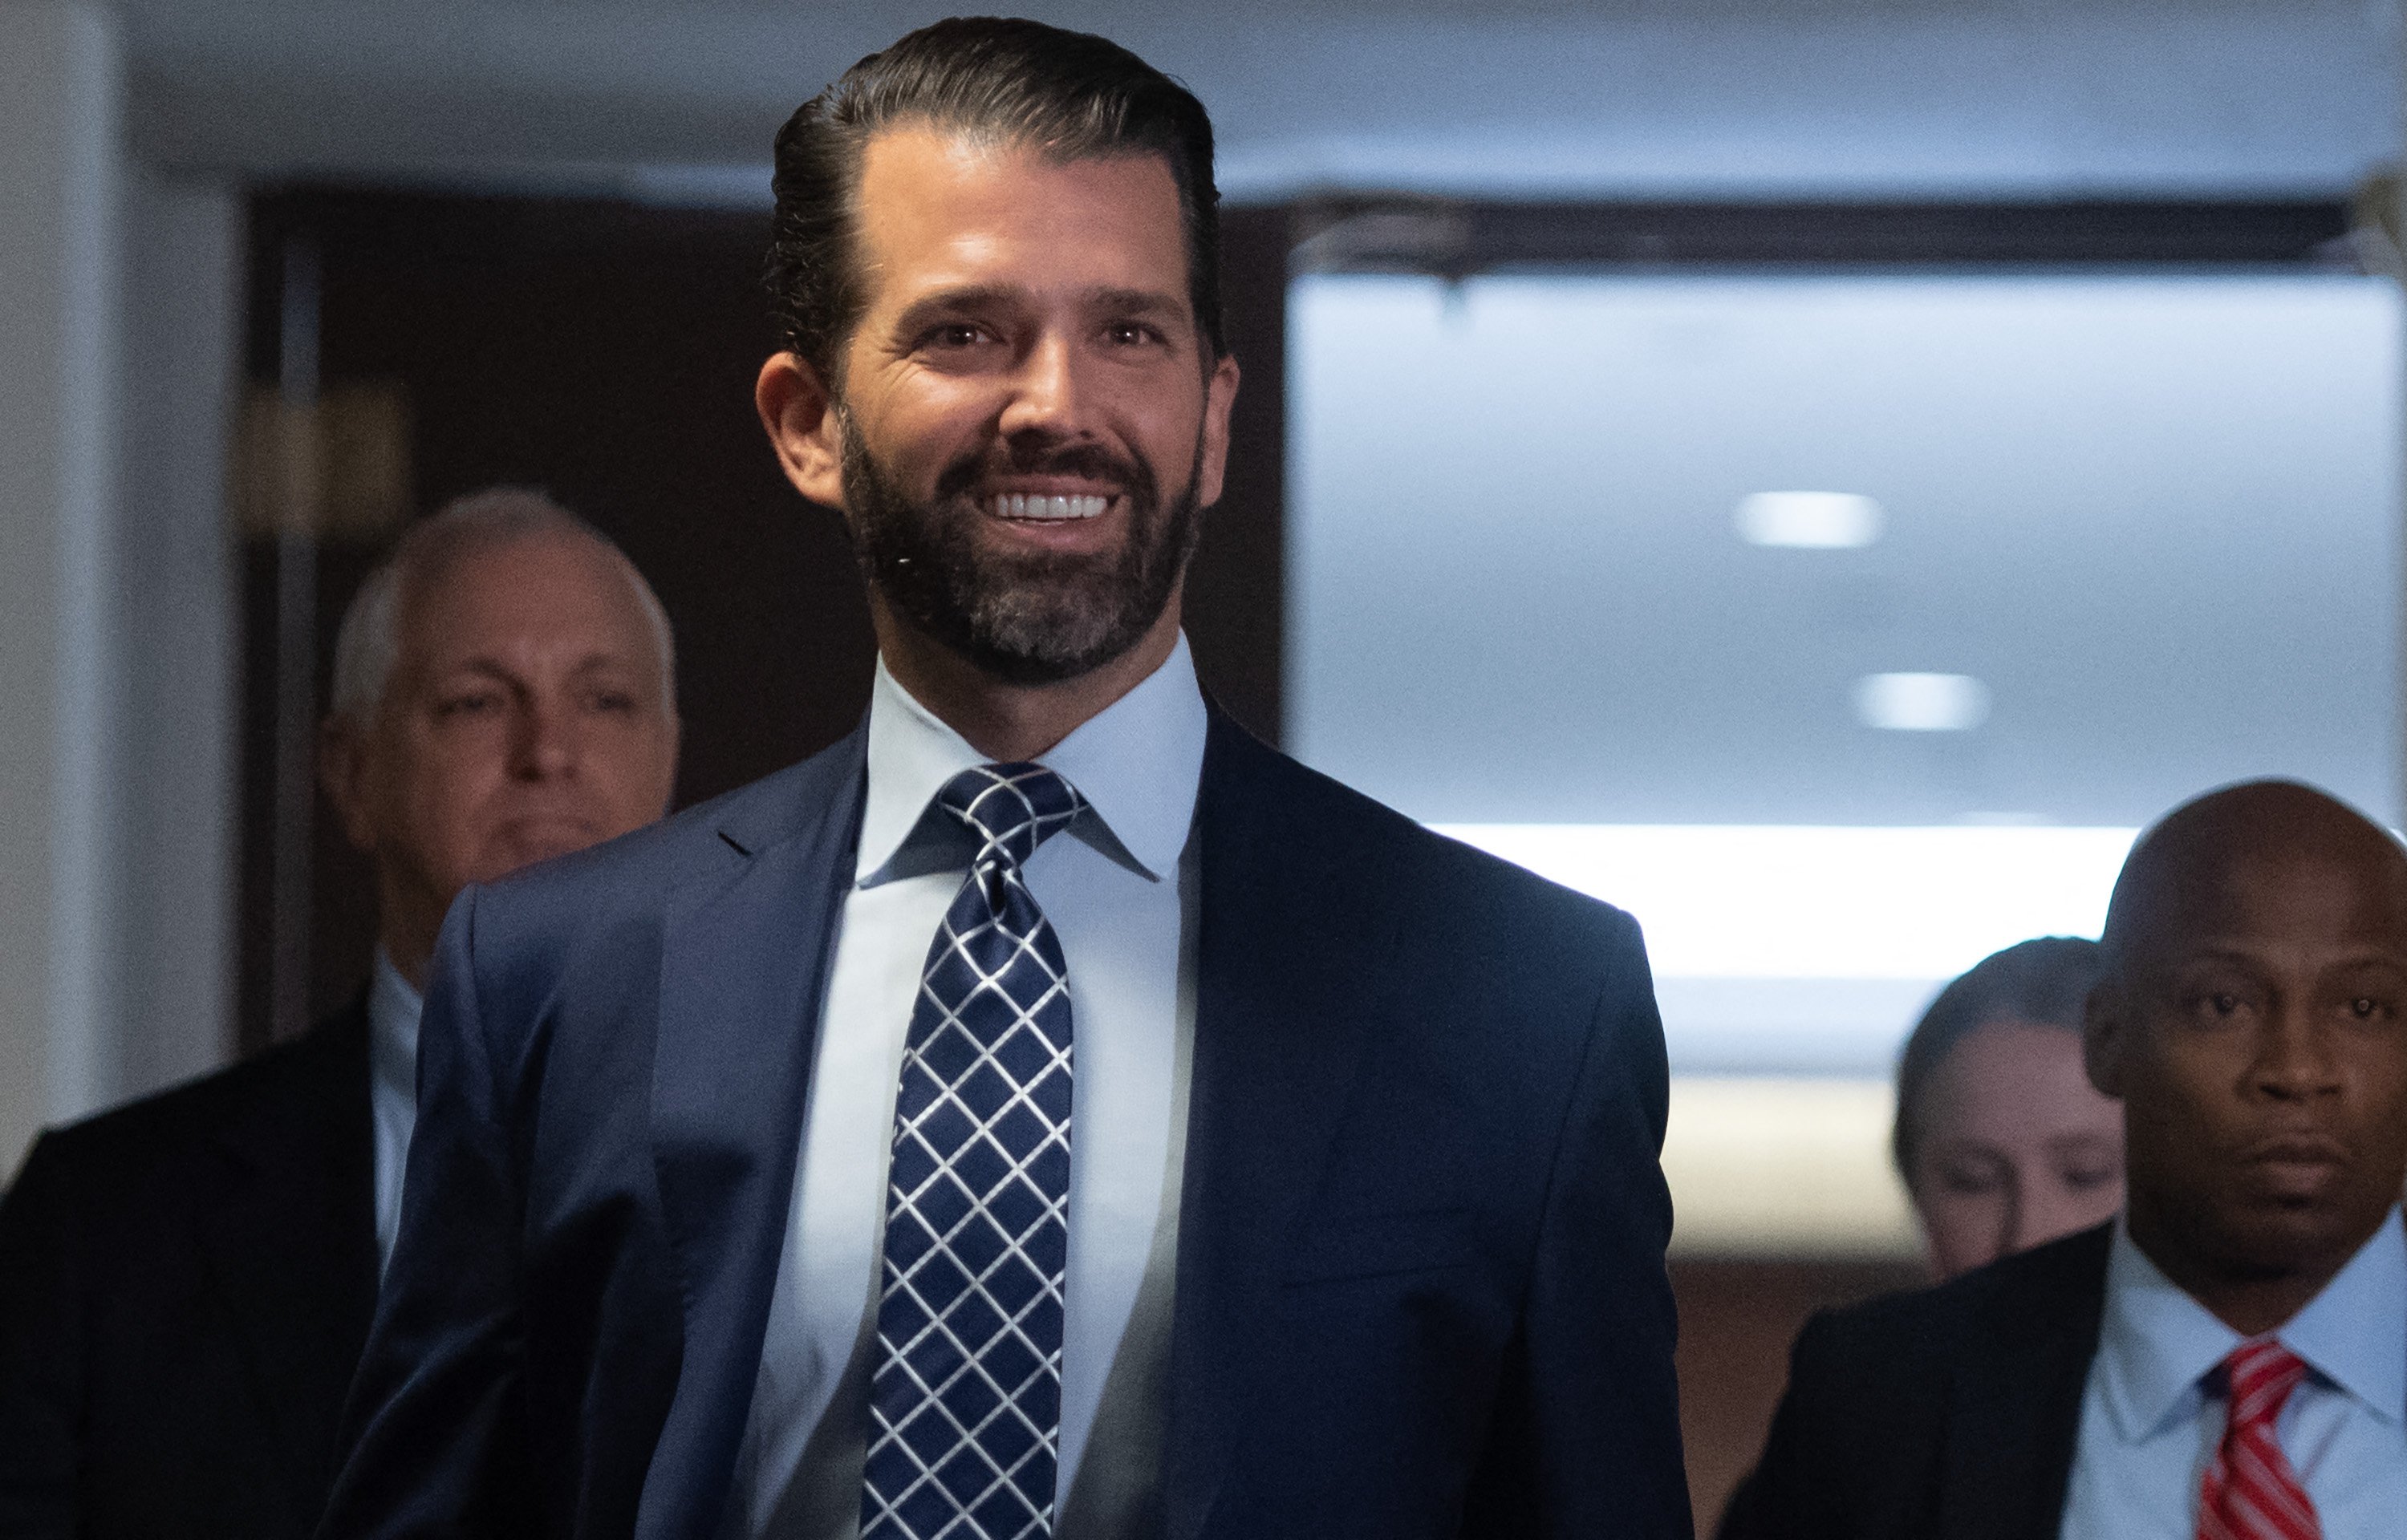 Donald Trump, Jr. arrives to testify before the US Senate Select Committee on Intelligence on Capitol Hill in Washington, DC on June 12, 2019. |  Source: Getty Images